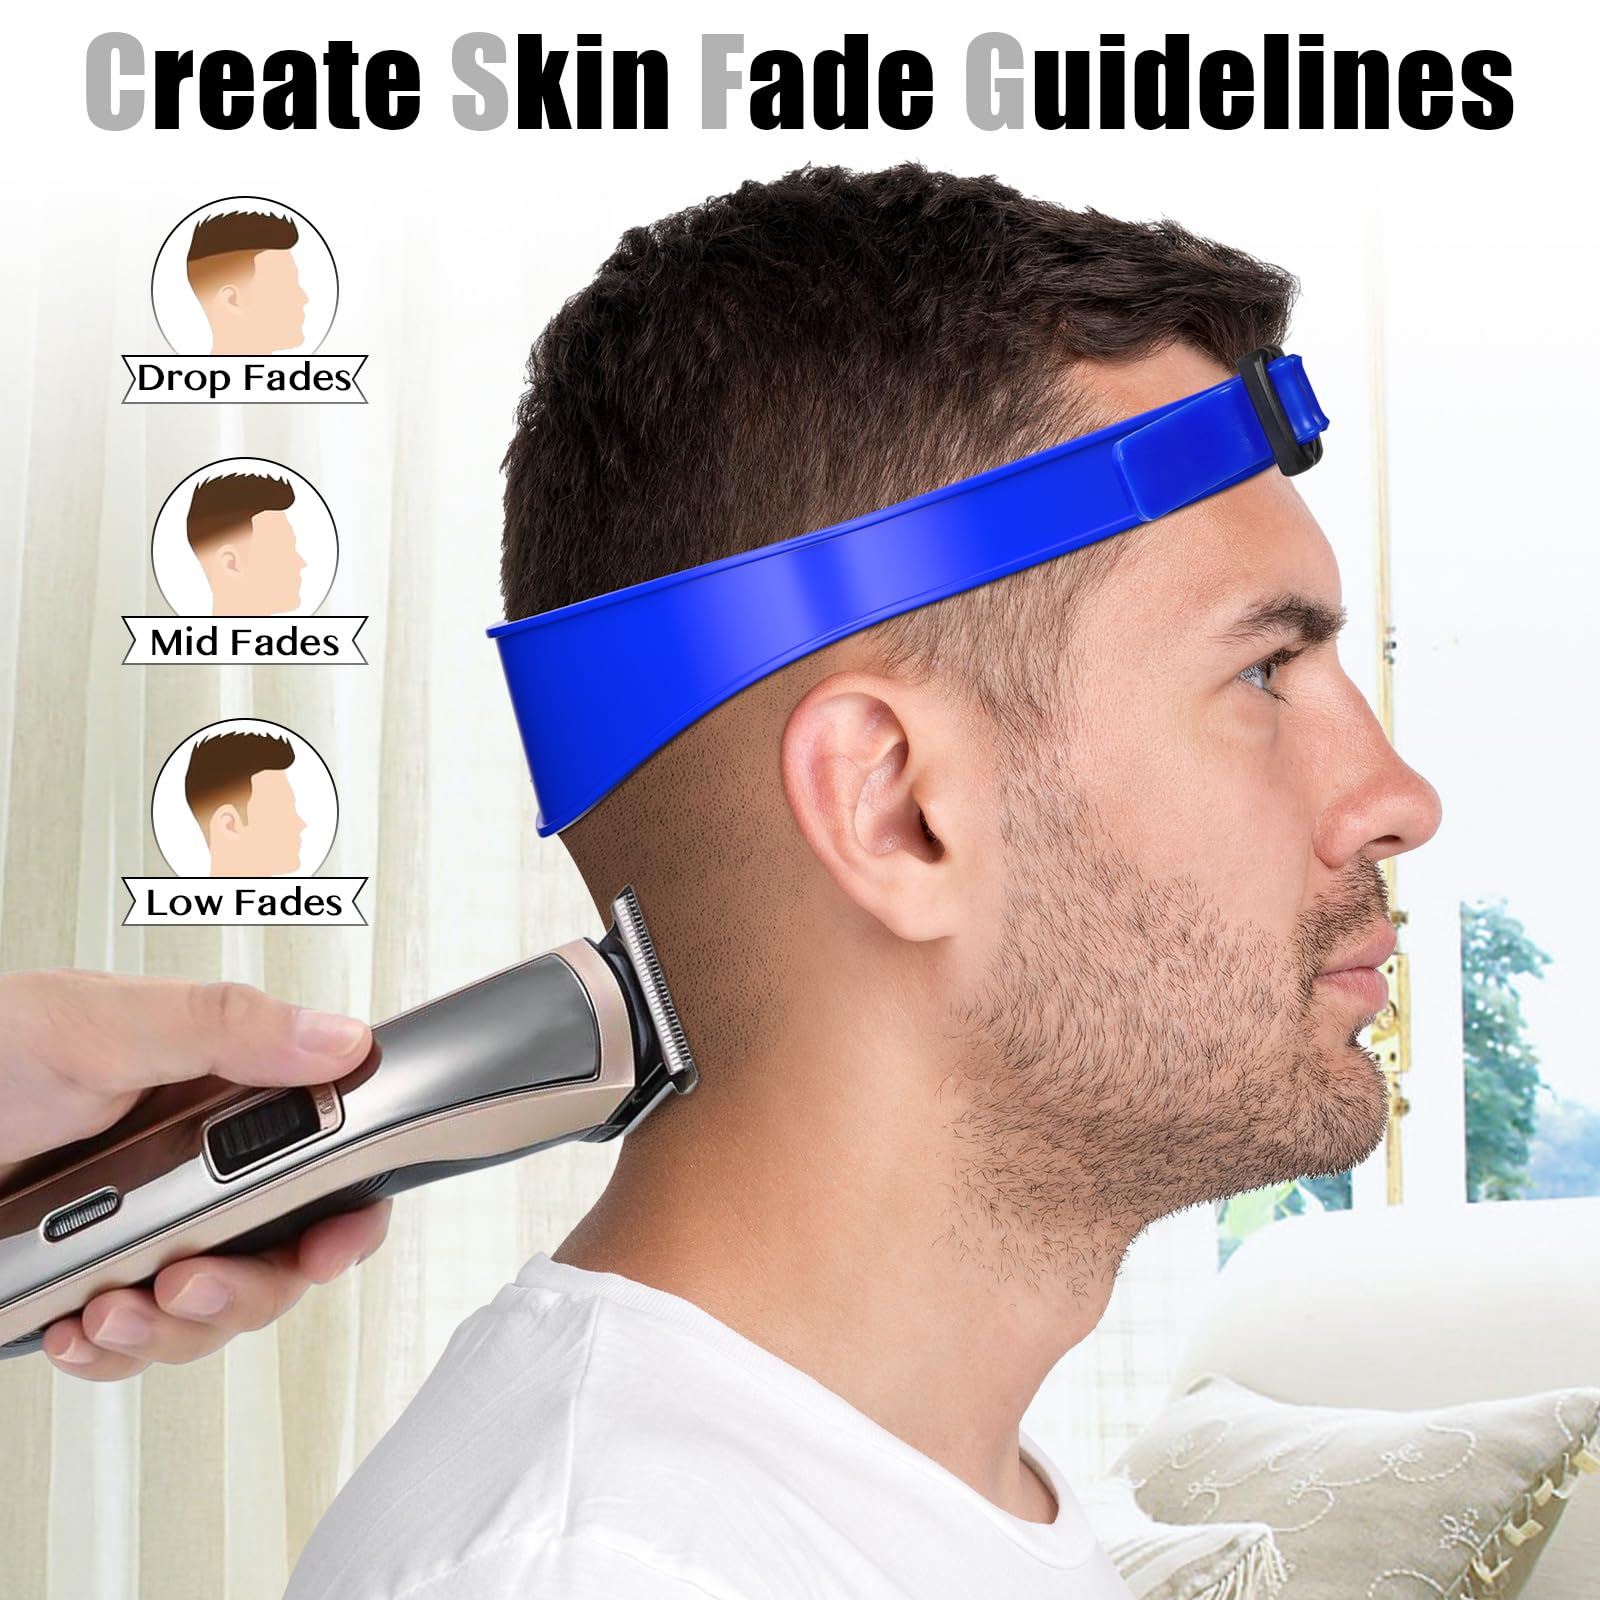 AOMGD Adjustable Hair Trimming Guide and Neckline Shaving Template,DIY Self Haircutting System, Shaving and Keeping a Clean and Straight Neck Hairline,Easy Use Tool Soft Portable(Blue)